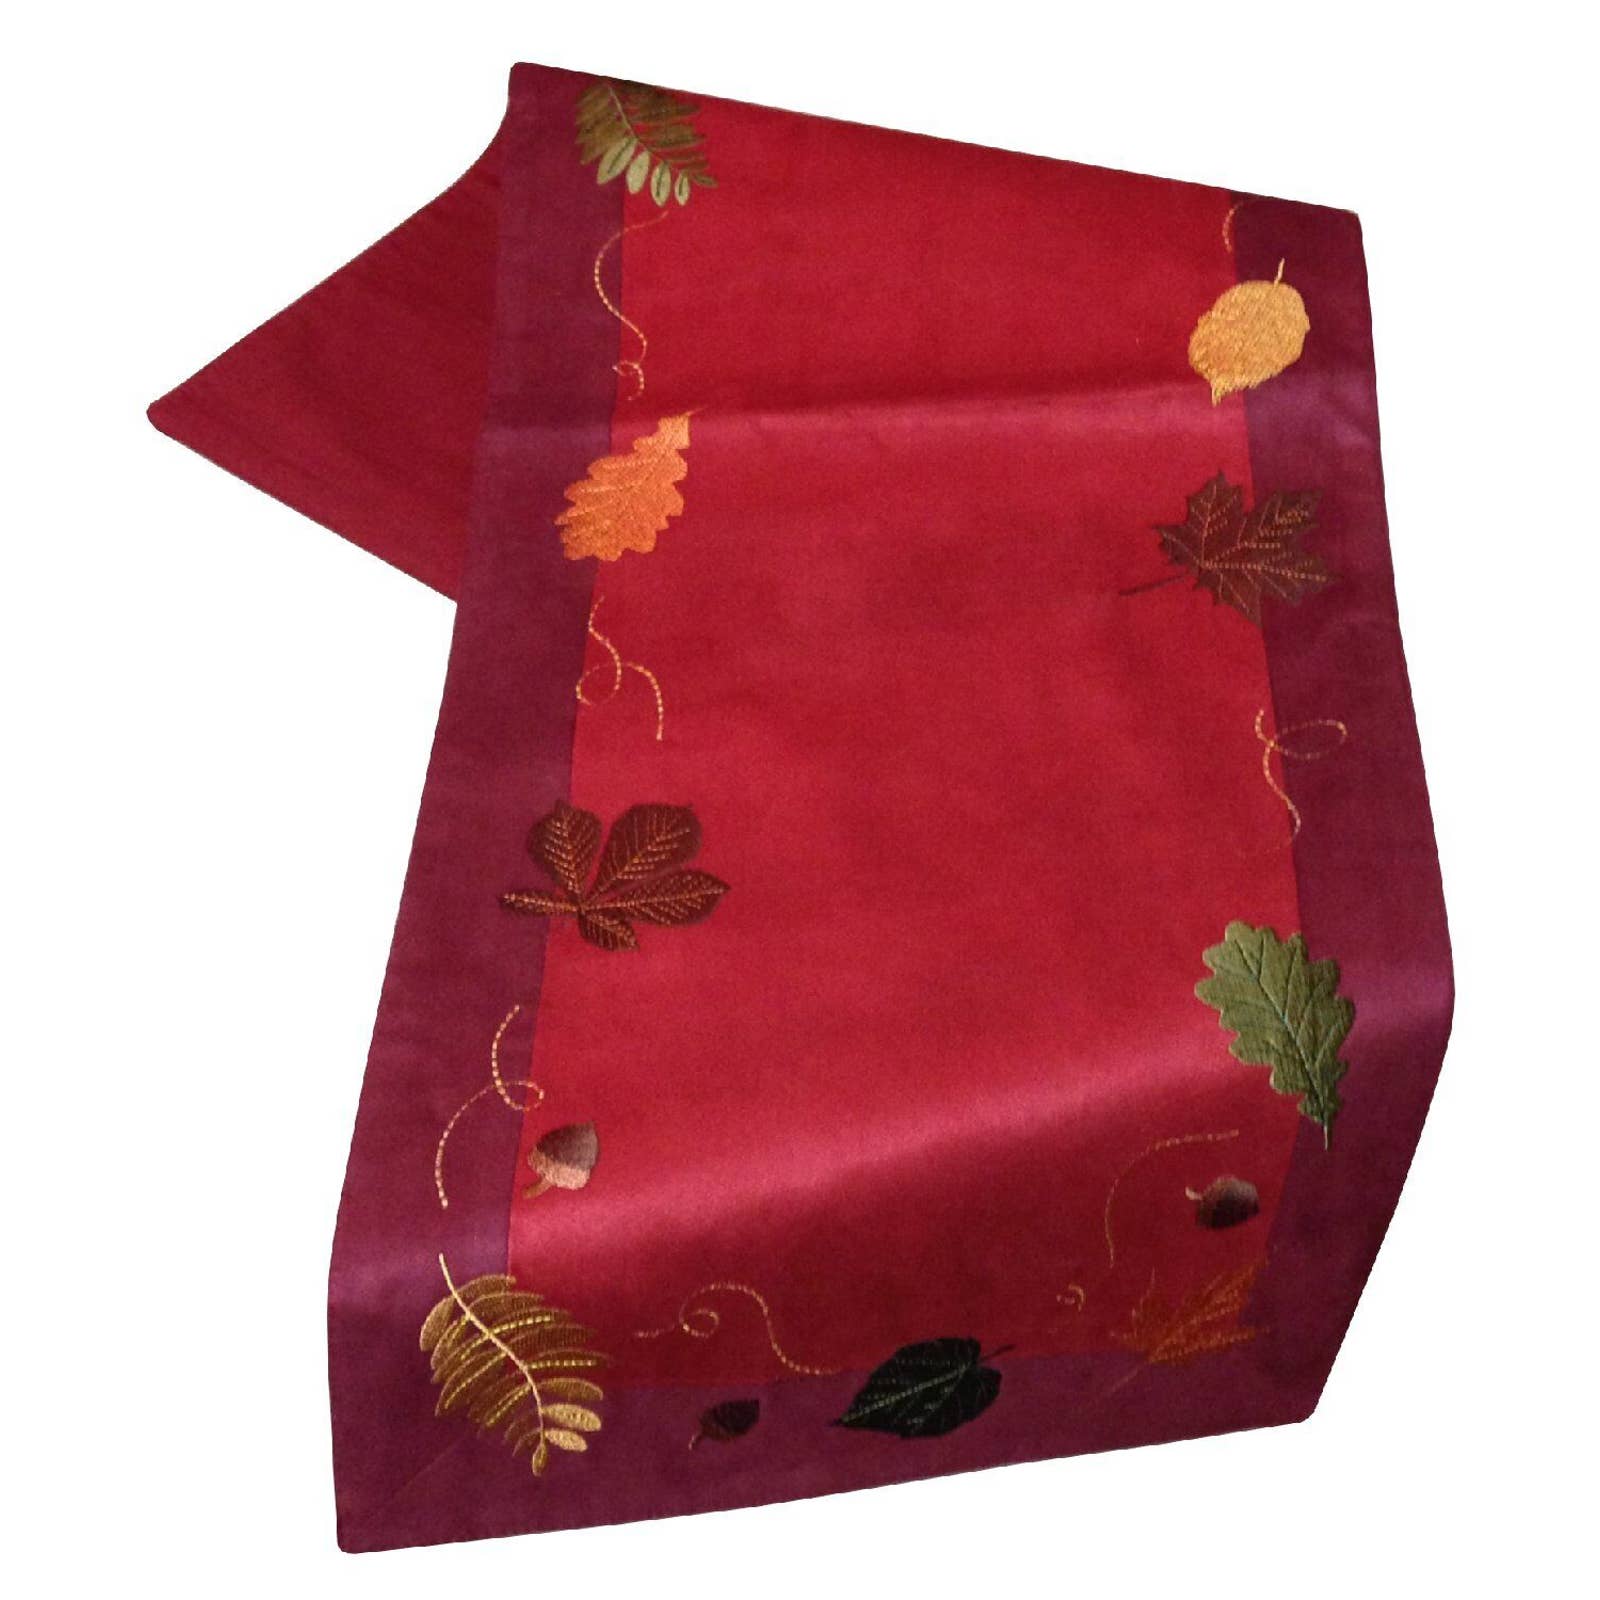 Embroidered Leaves Table Runner Autumn Harvest Microsuede Maroon Topper NEW 36"'